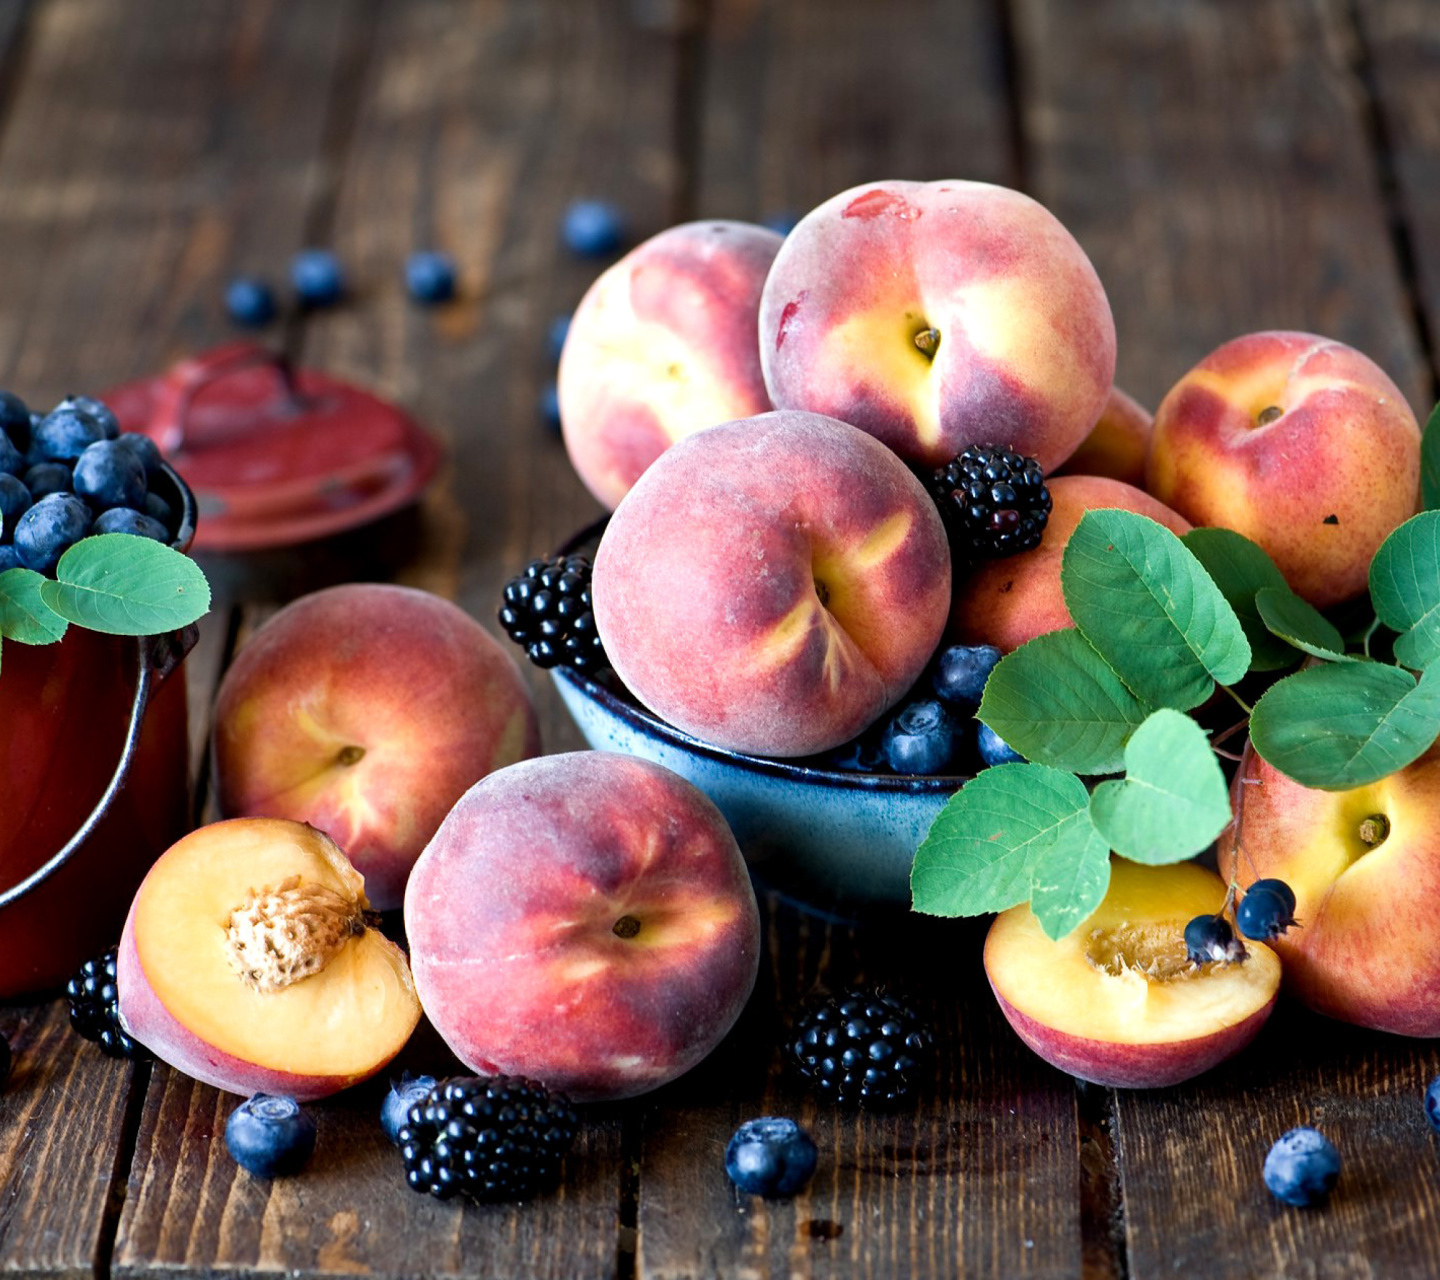 Blueberries and Peaches wallpaper 1440x1280